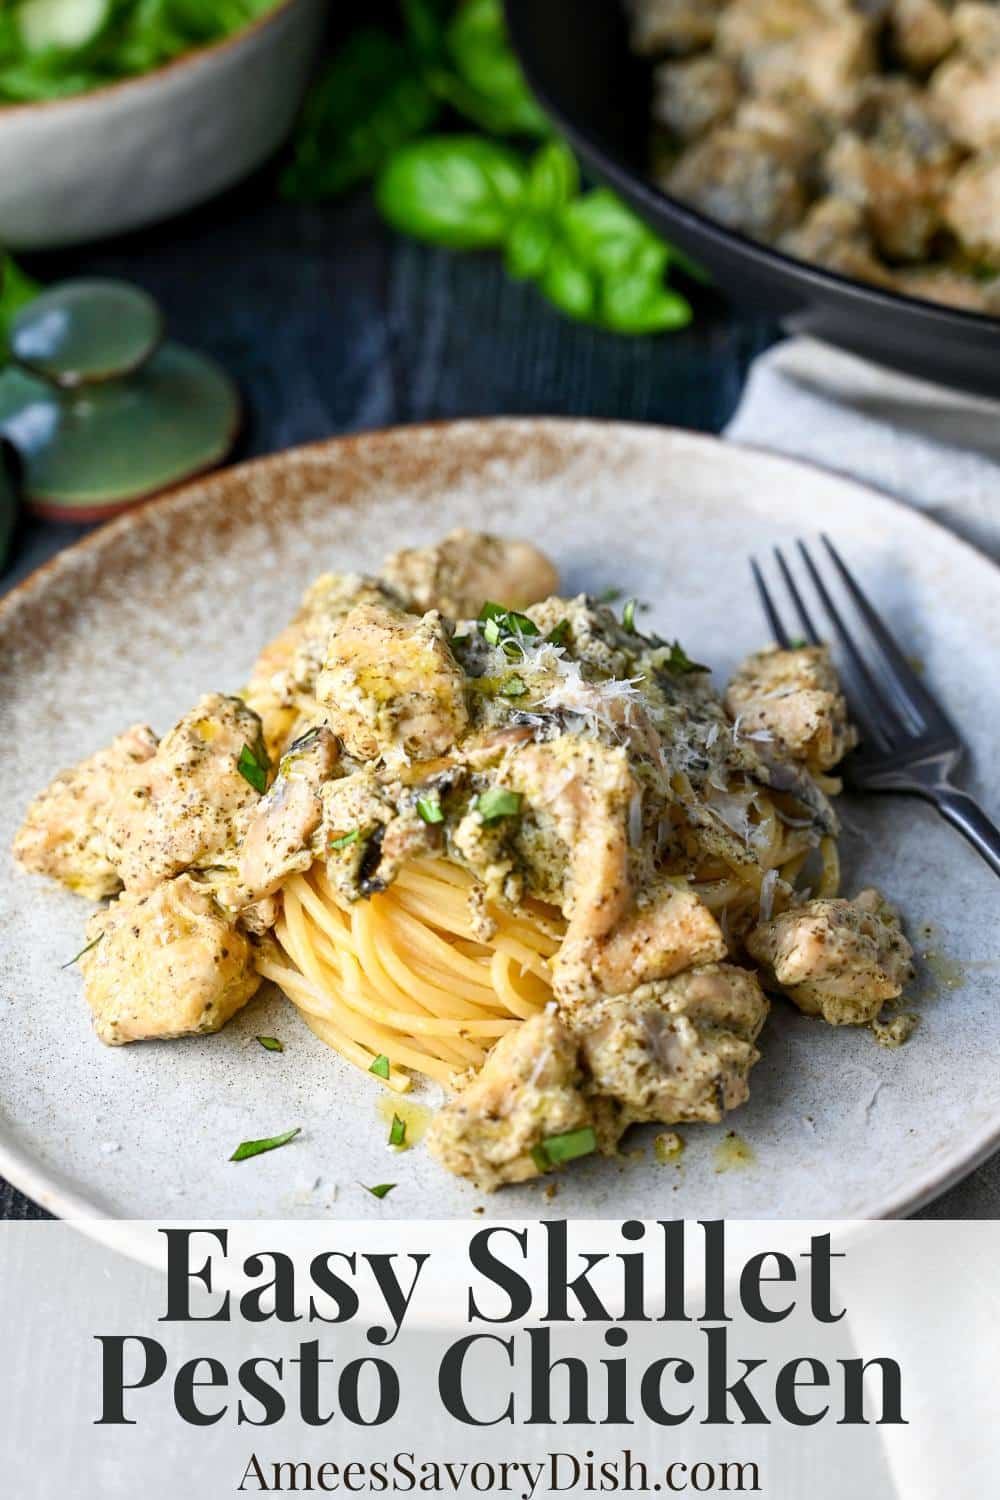 Simplify dinnertime with this delicious Pesto Chicken Skillet Recipe featuring boneless chicken breasts, mushrooms, creamy pesto sauce, and Parmesan cheese. via @Ameessavorydish